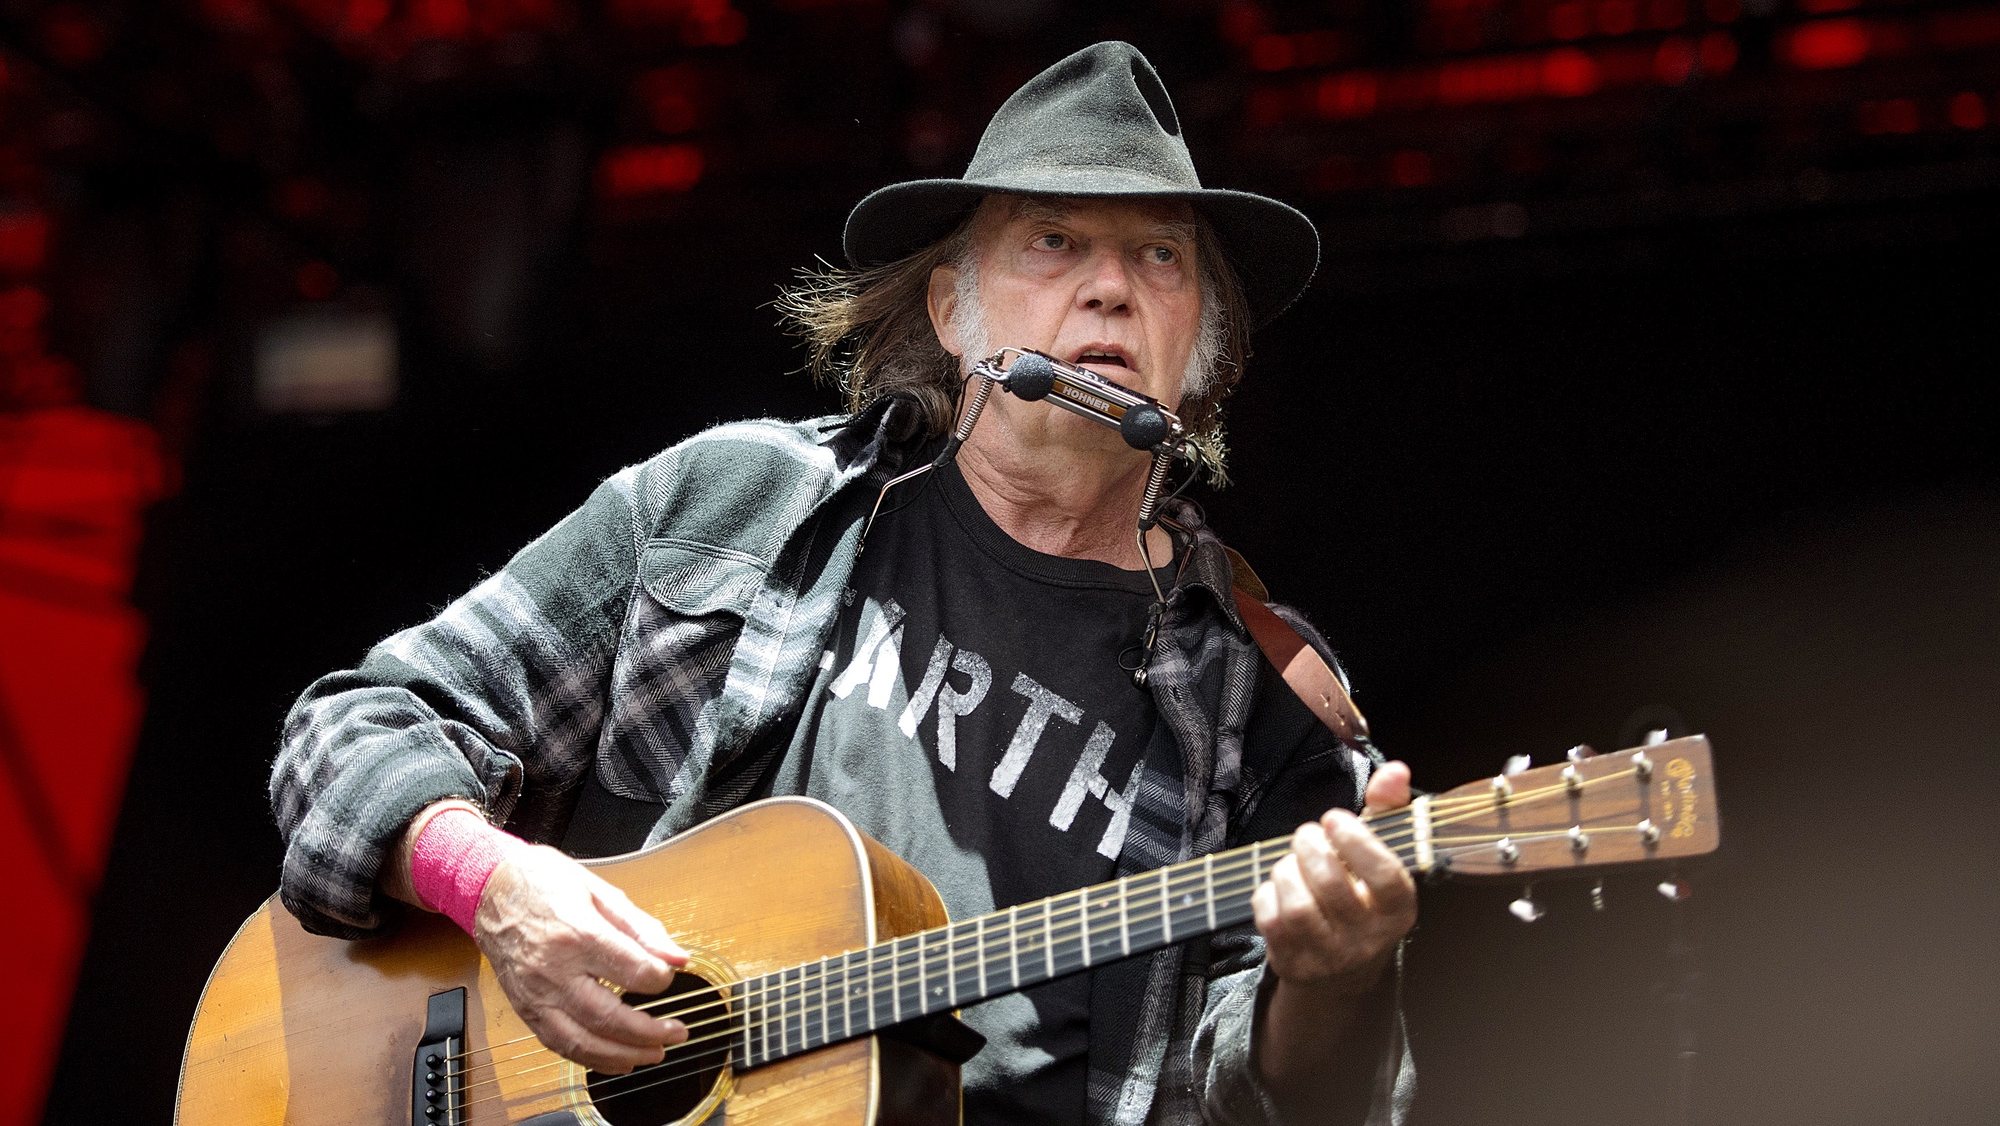 epa08815385 (FILE) - Canadian singer-songwriter Neil Young performs at the Orange Stage at the Roskilde Festival in Roskilde, Denmark, 01 July 2016 (reissued 12 November 2020). Neil Young turnS 75 on 12 November 2020.  EPA/NILS MEILVANG DENMARK OUT *** Local Caption *** 53932572